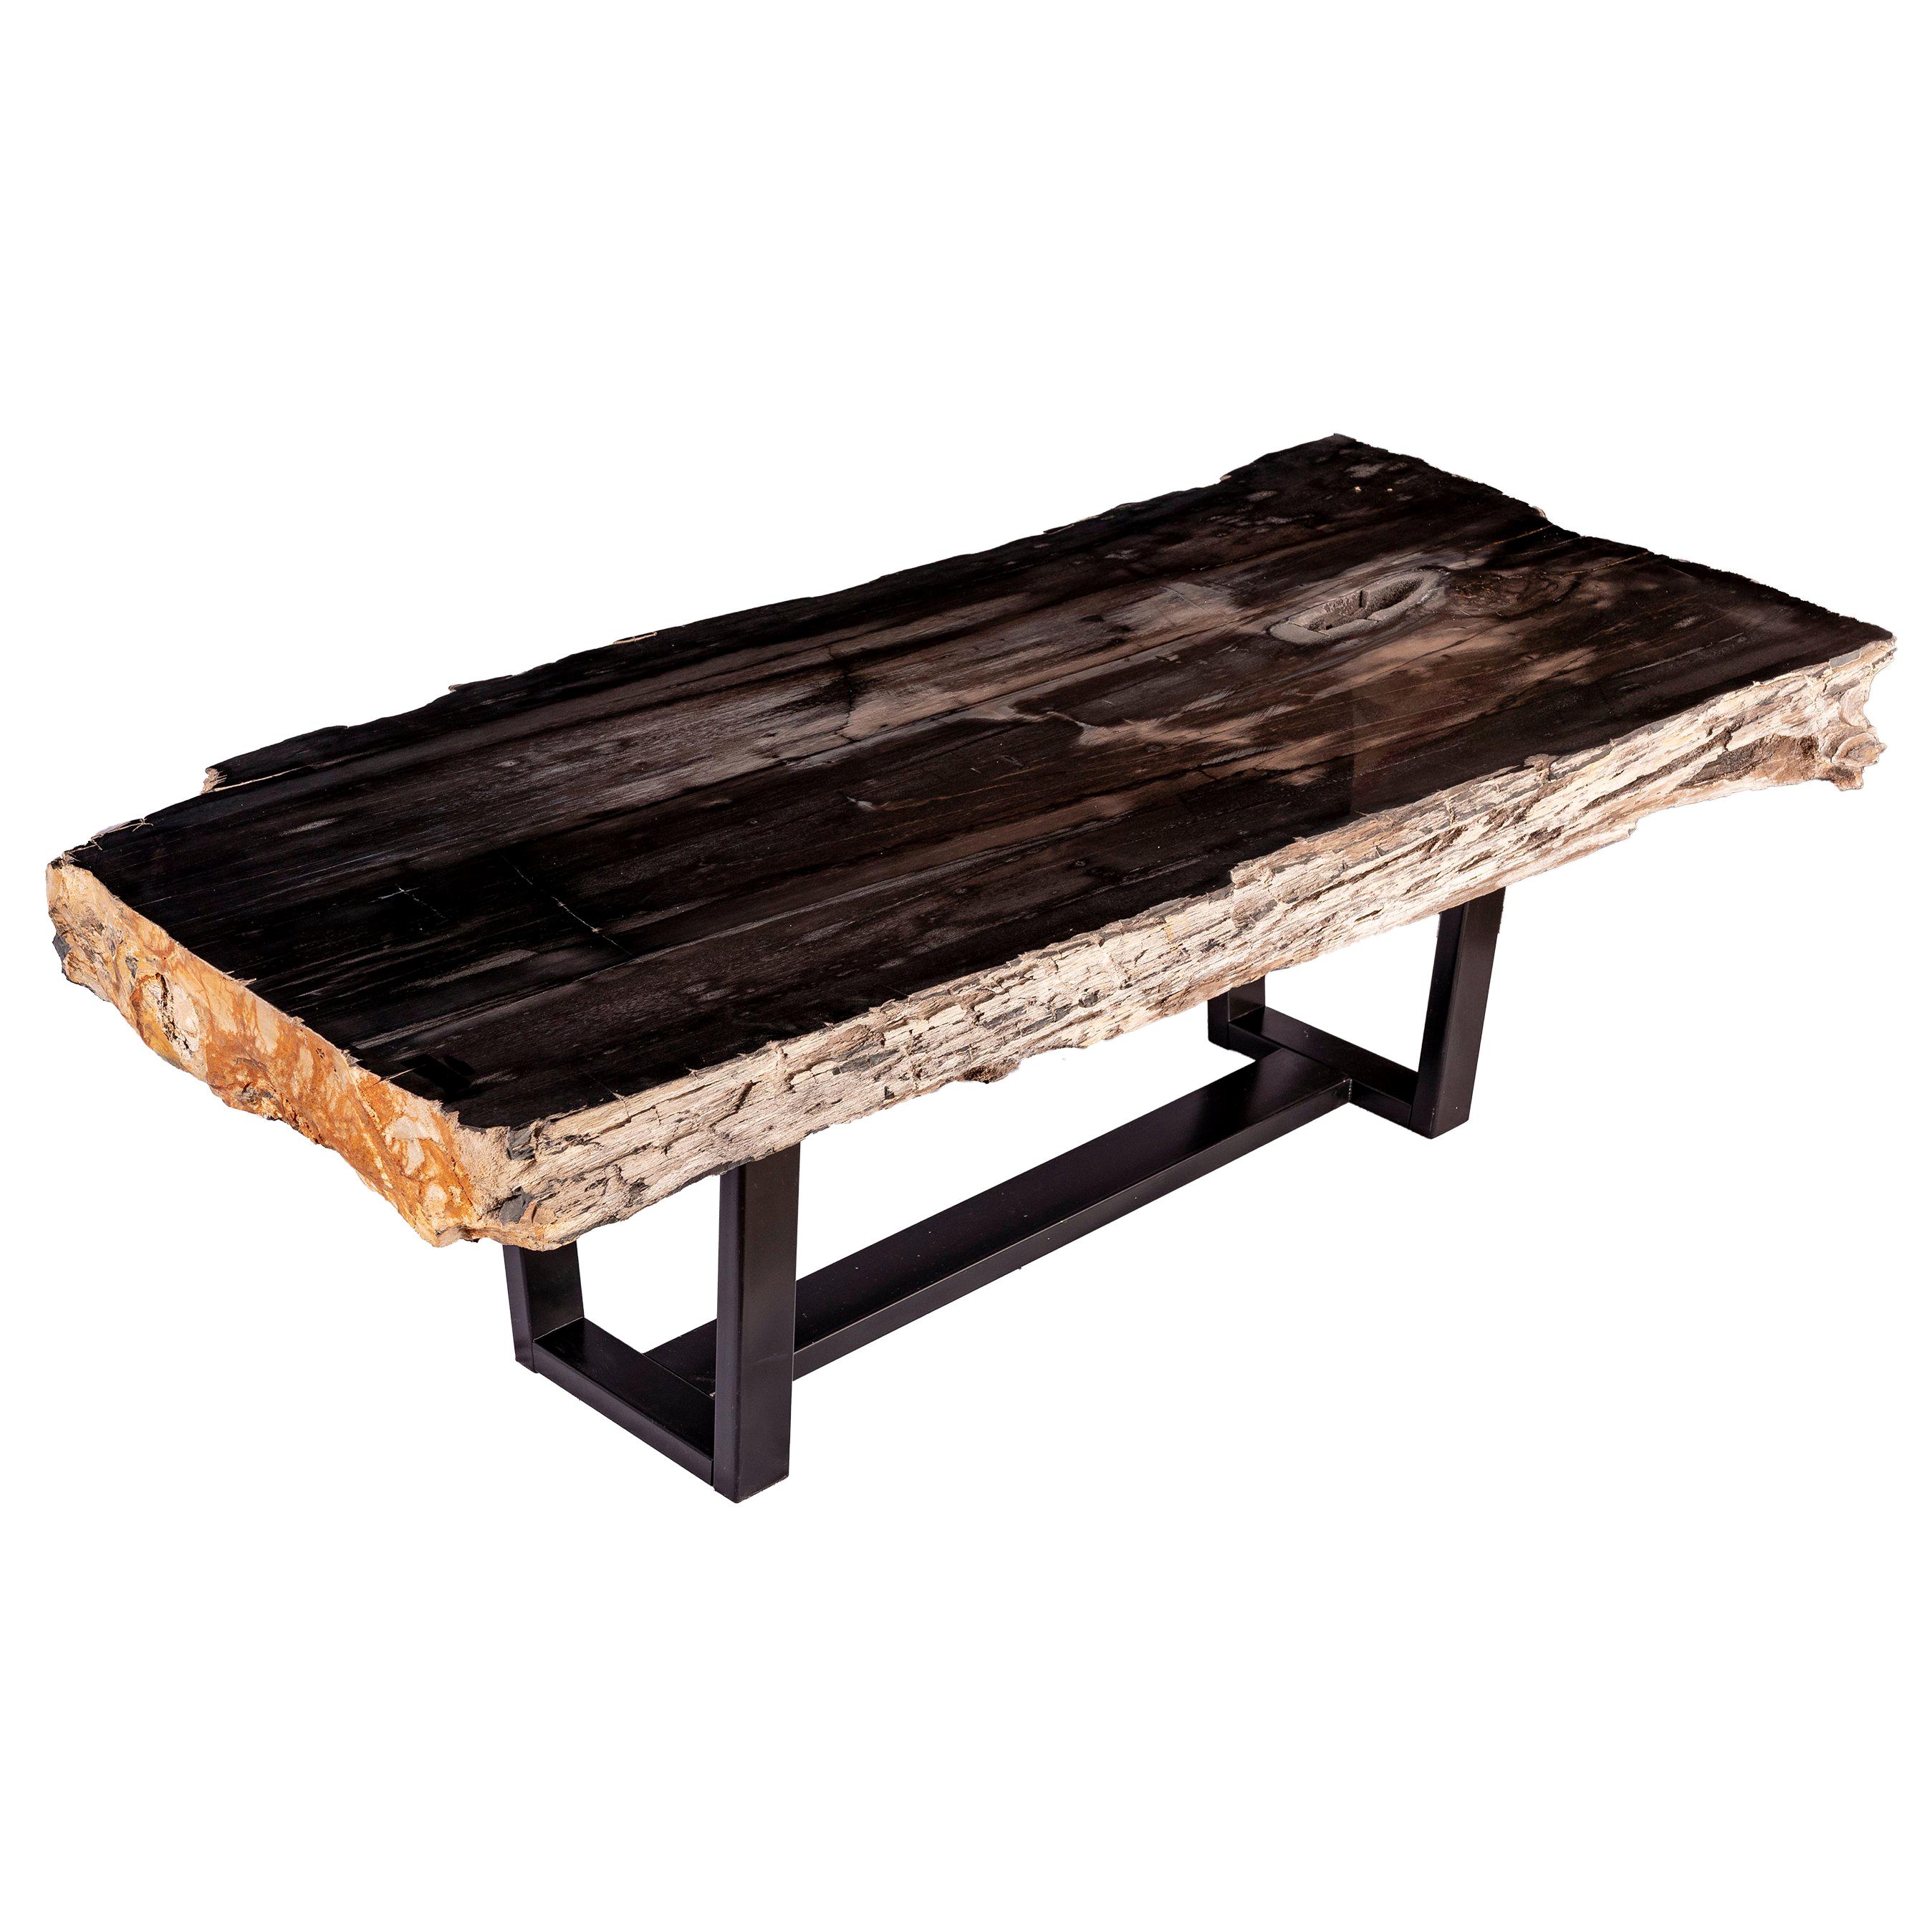 Center of Coffee Table, Rectangular Shape, Petrified Wood with Metal Base